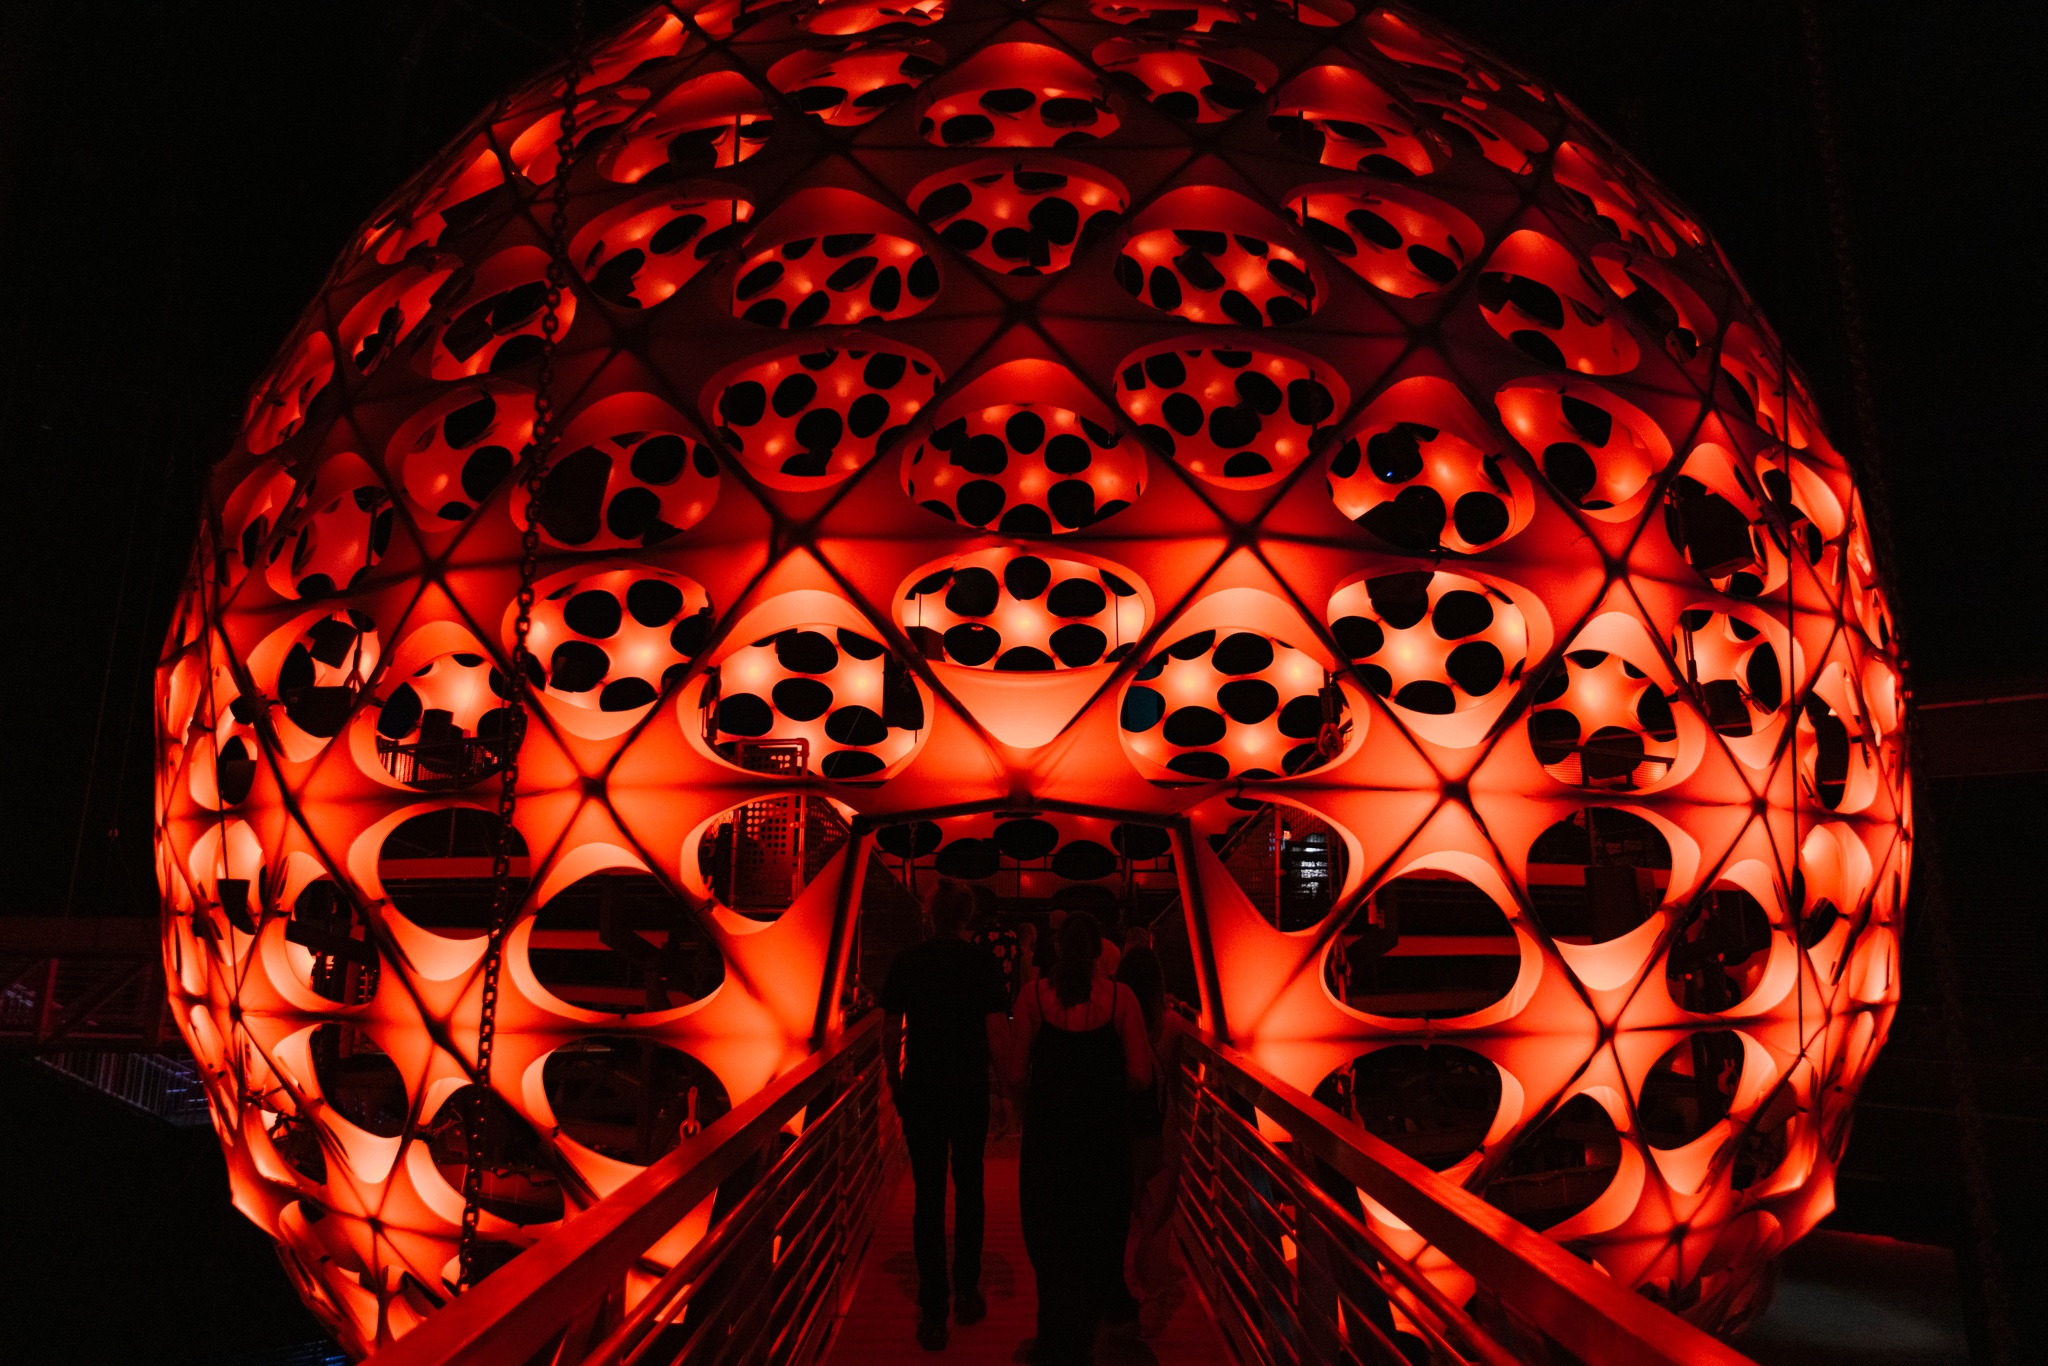 Two people seen from behind enter a large spherical concert hall. The surface of the sphere is dotted with light nodes that emanate a red-orange glow.